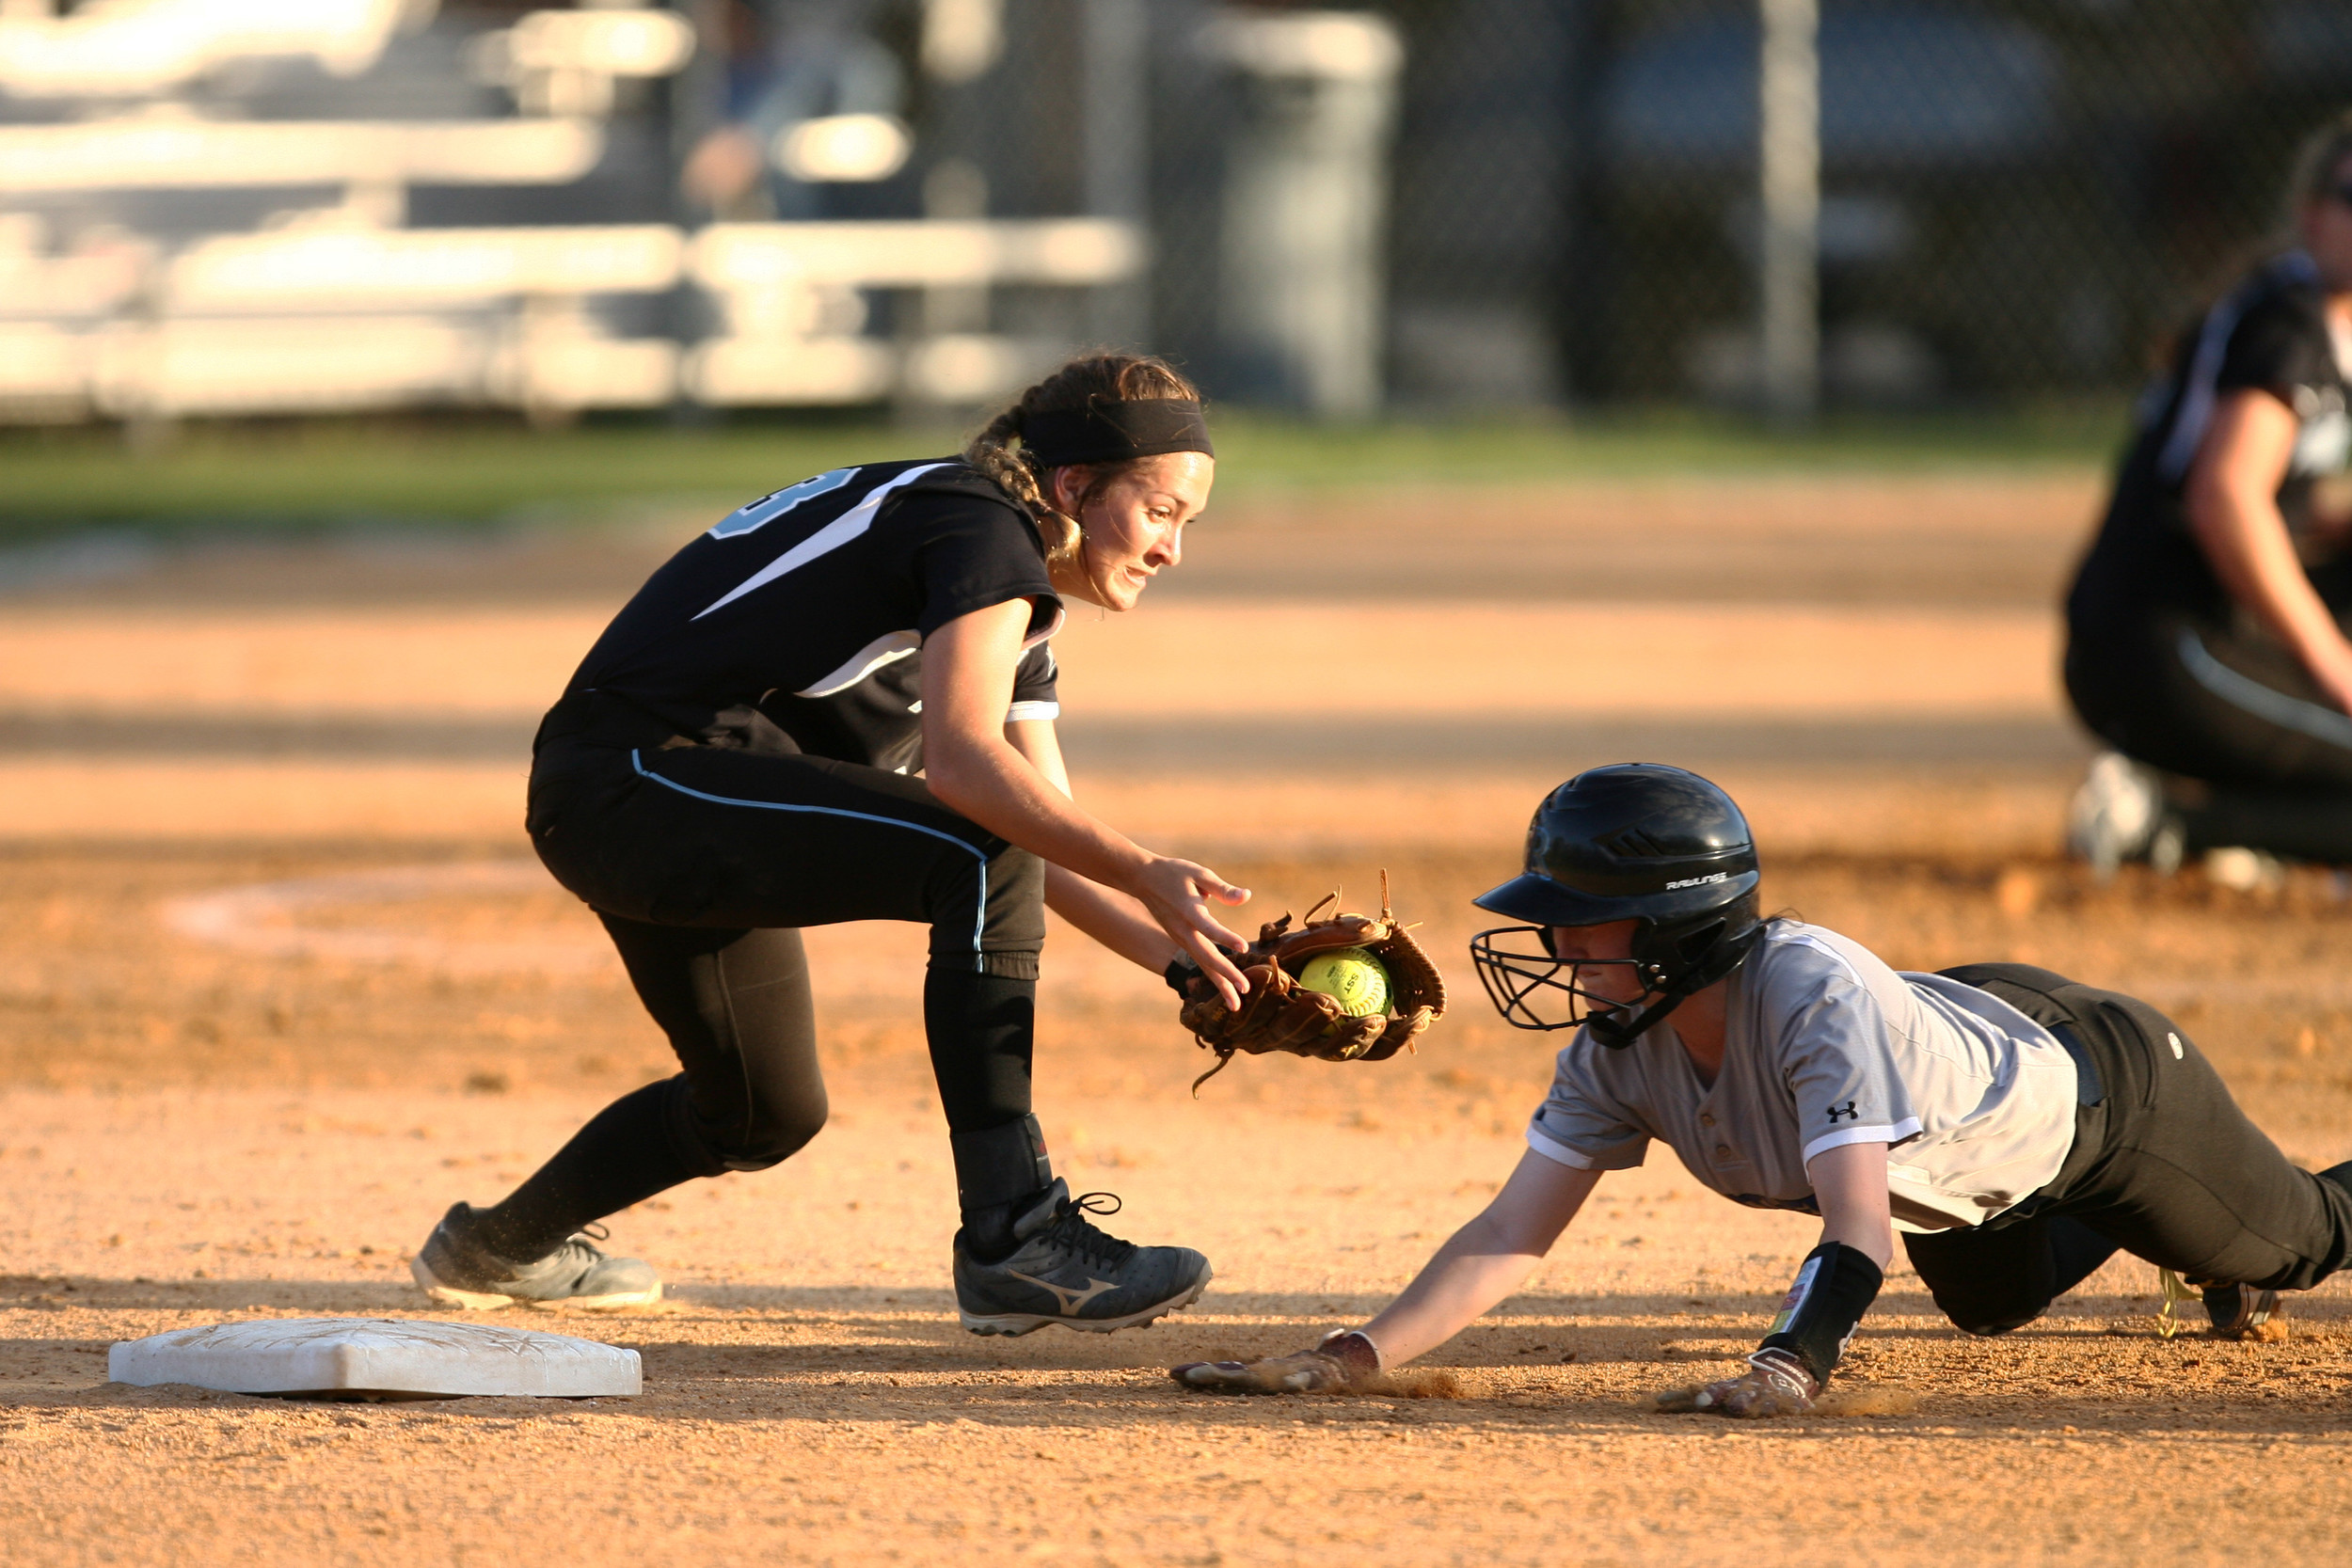 Shark second baseman Kiley Hennessey tries to tag the Ridgeview base runner, diving back to second on an infield hit. The umpire called the runner safe on the play.